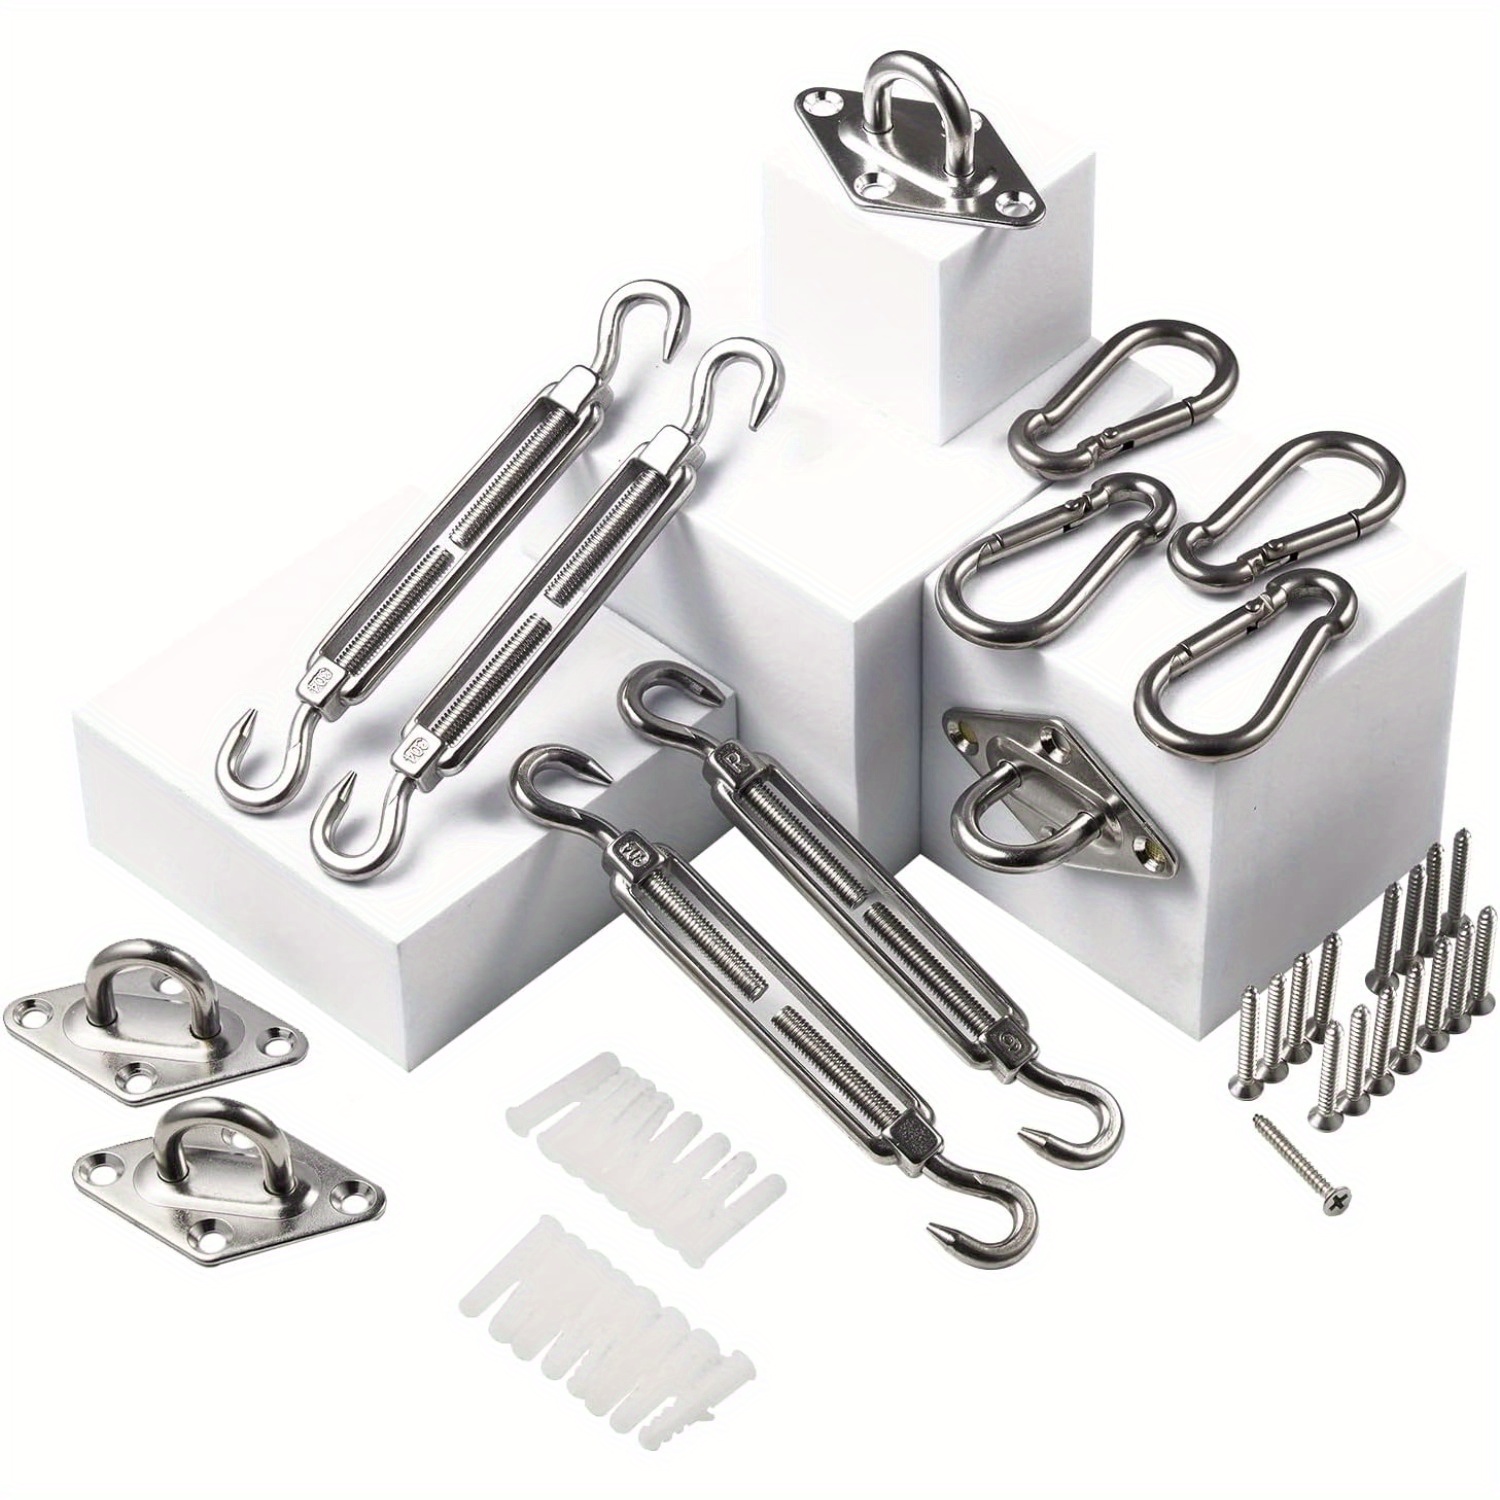 

Shade Hardware Kit For Triangle Rectangle Sun Shade Outdoor Installation, Heavy Duty 304 Stainless Steel Hardware, 44pcs